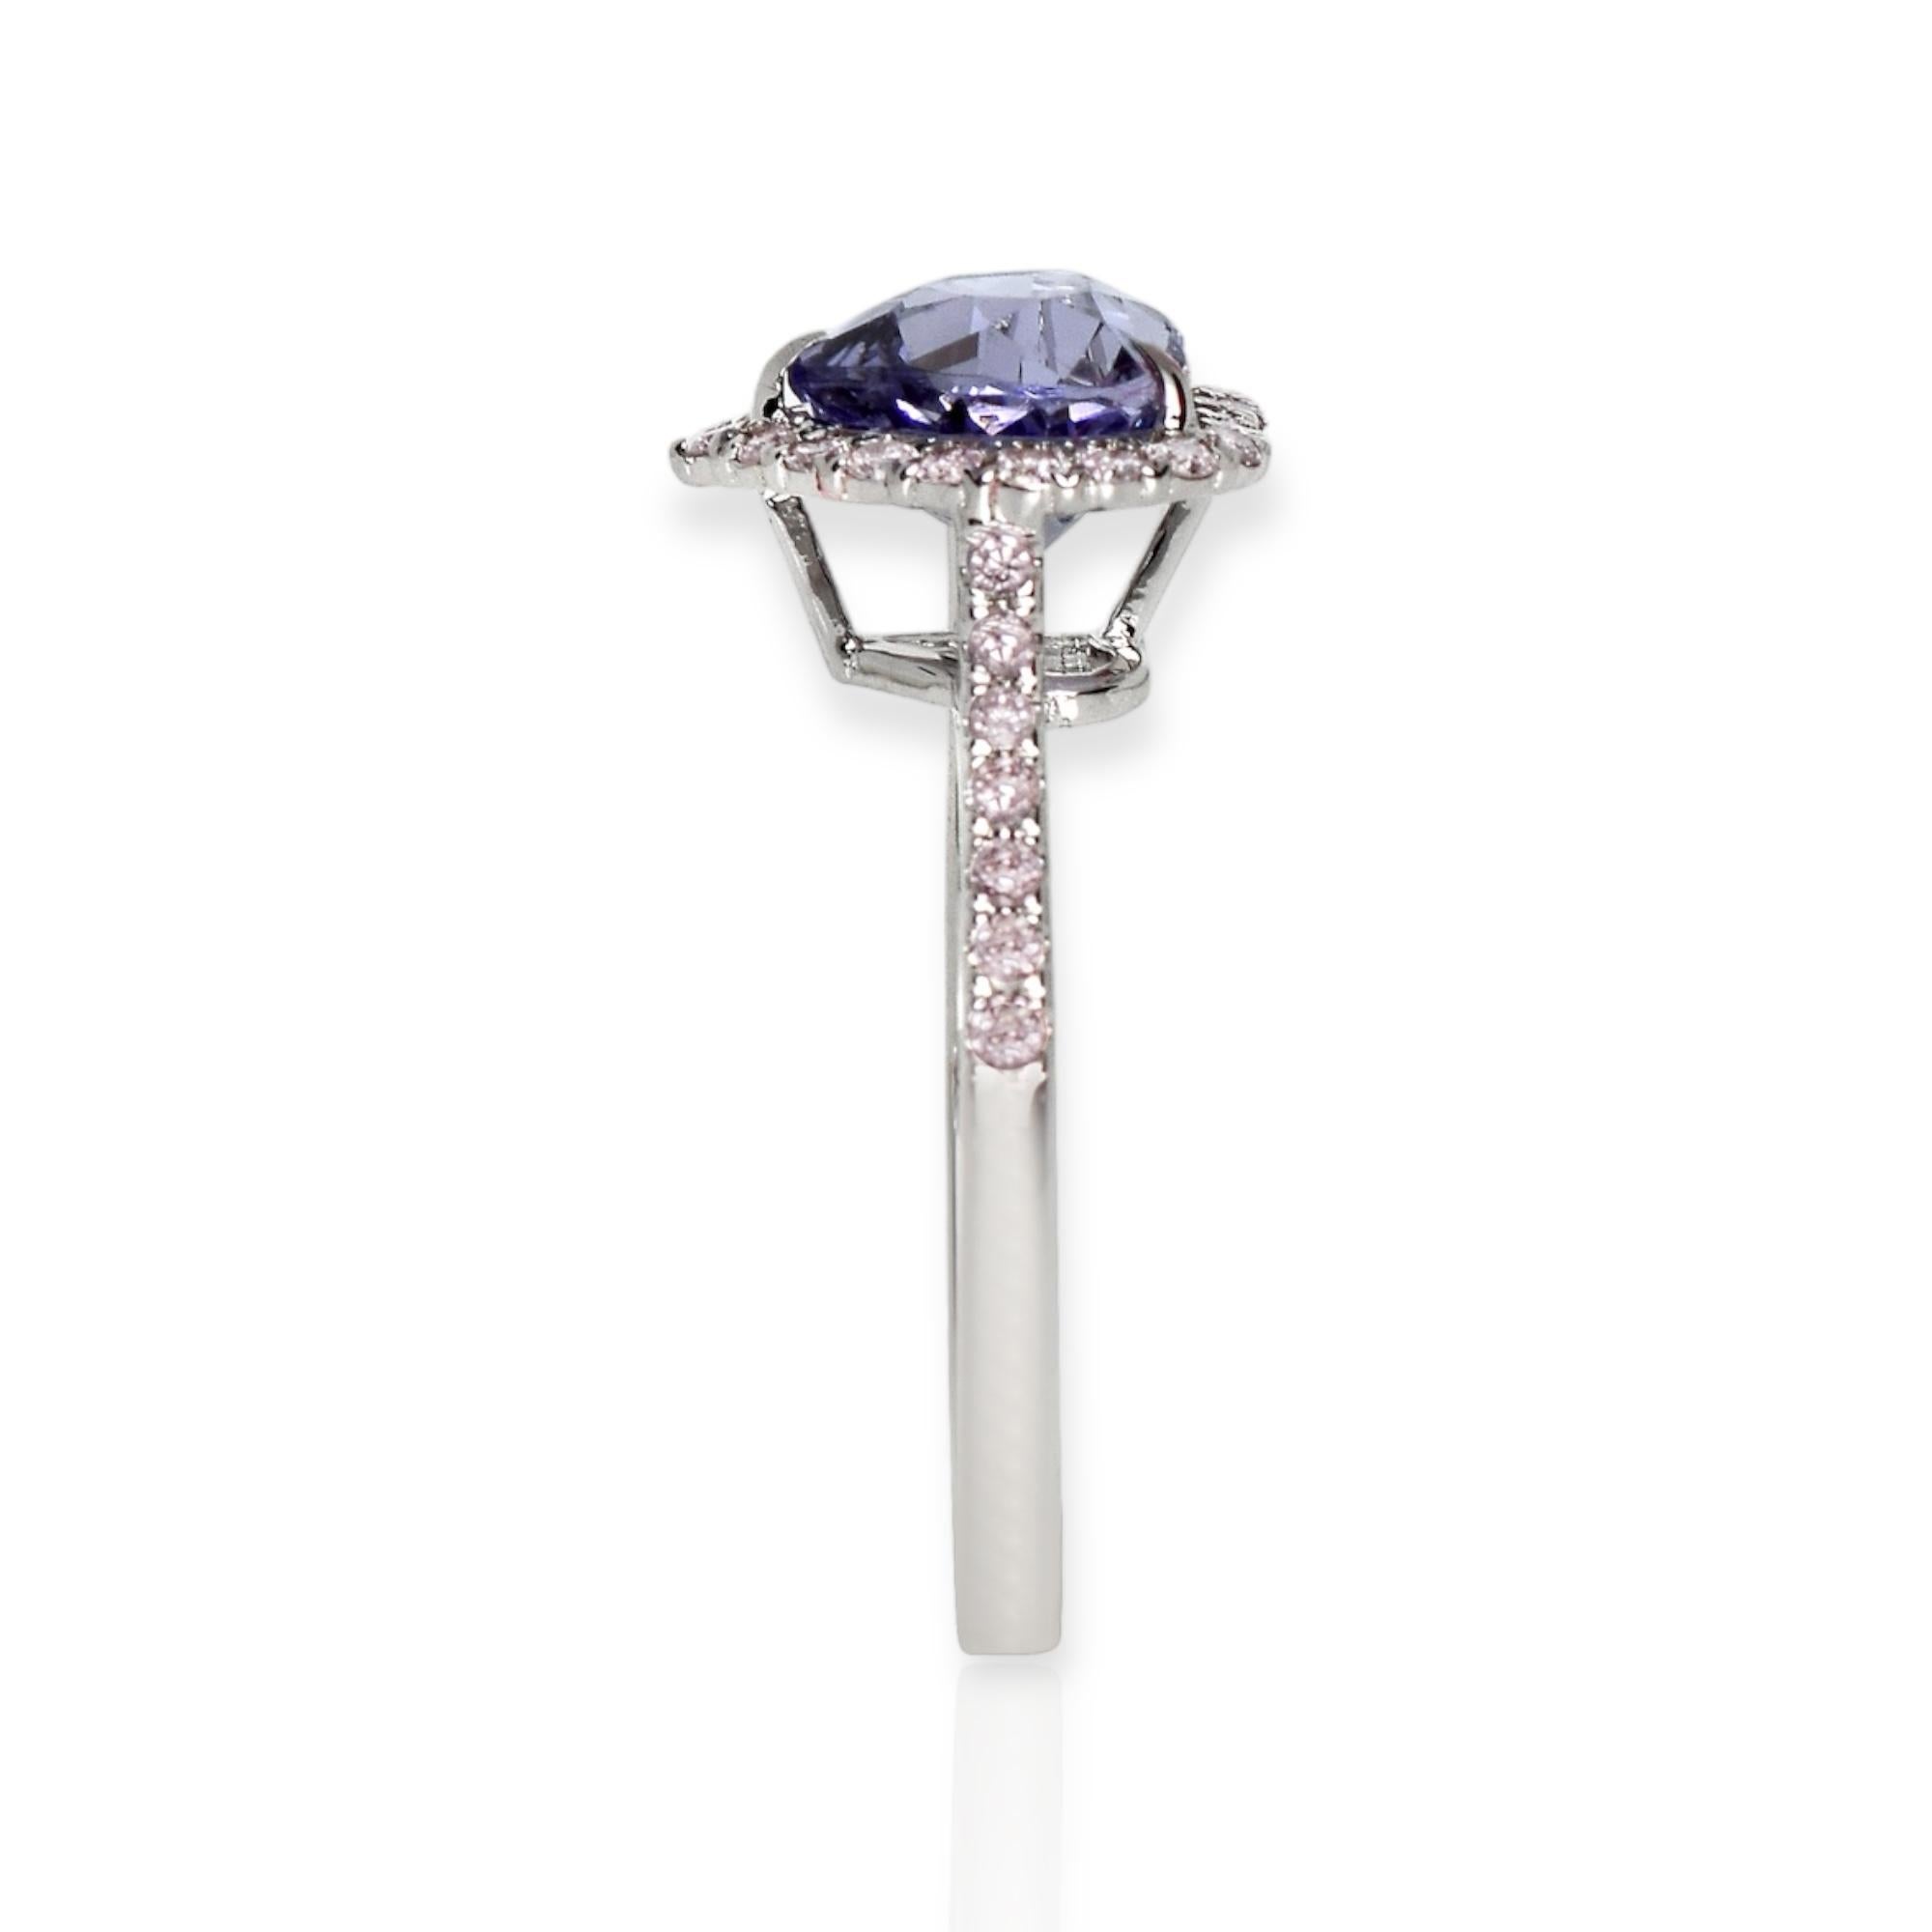 IGI 14K 1.88 Ct Purple Spinel&Pink Diamonds Antique Engagement Ring In New Condition For Sale In Kaohsiung City, TW